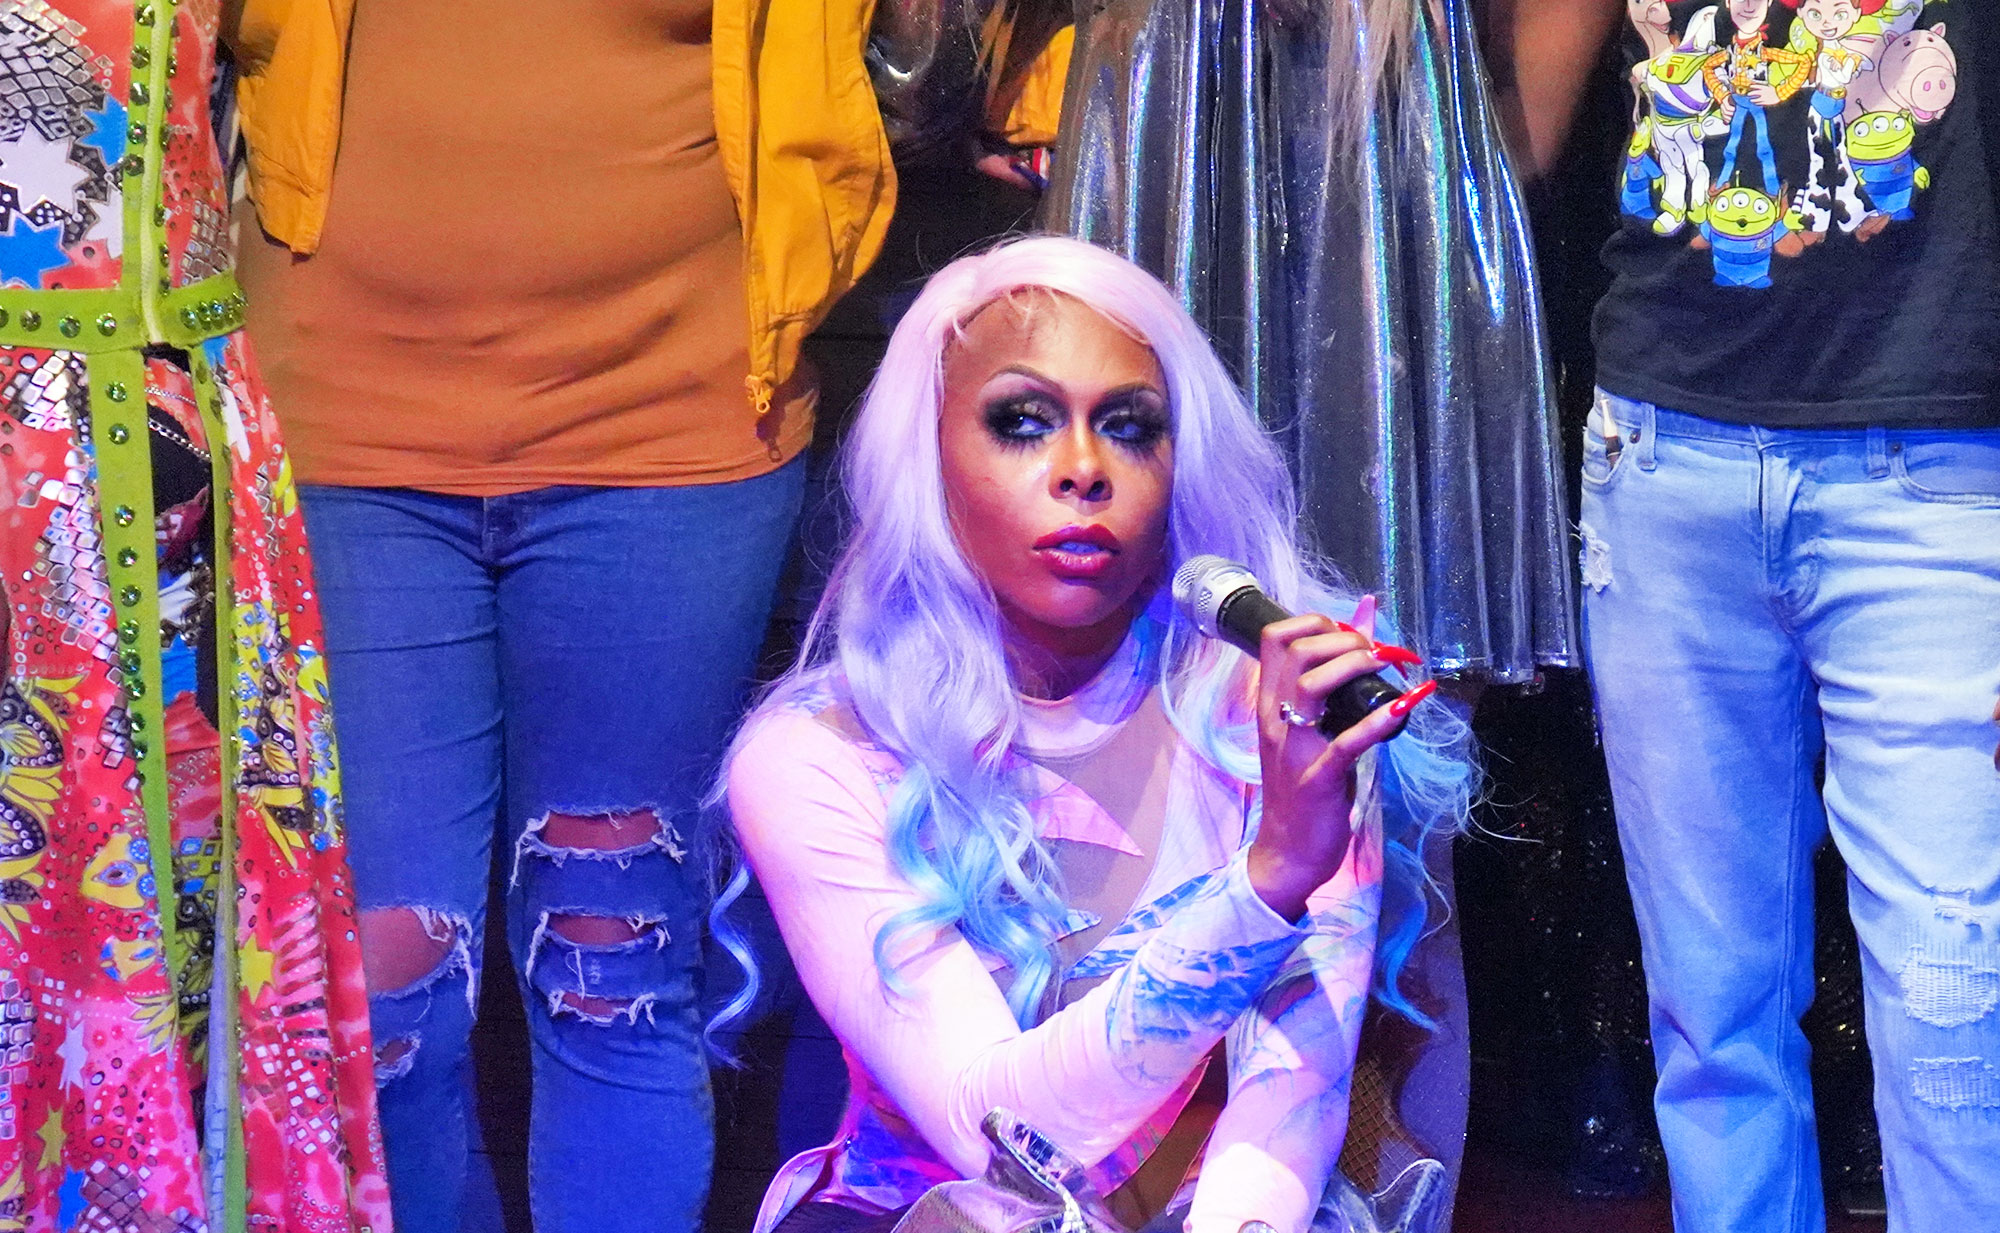 Liyah Alize performs at Liquid Zoo Drag Queen Brunch